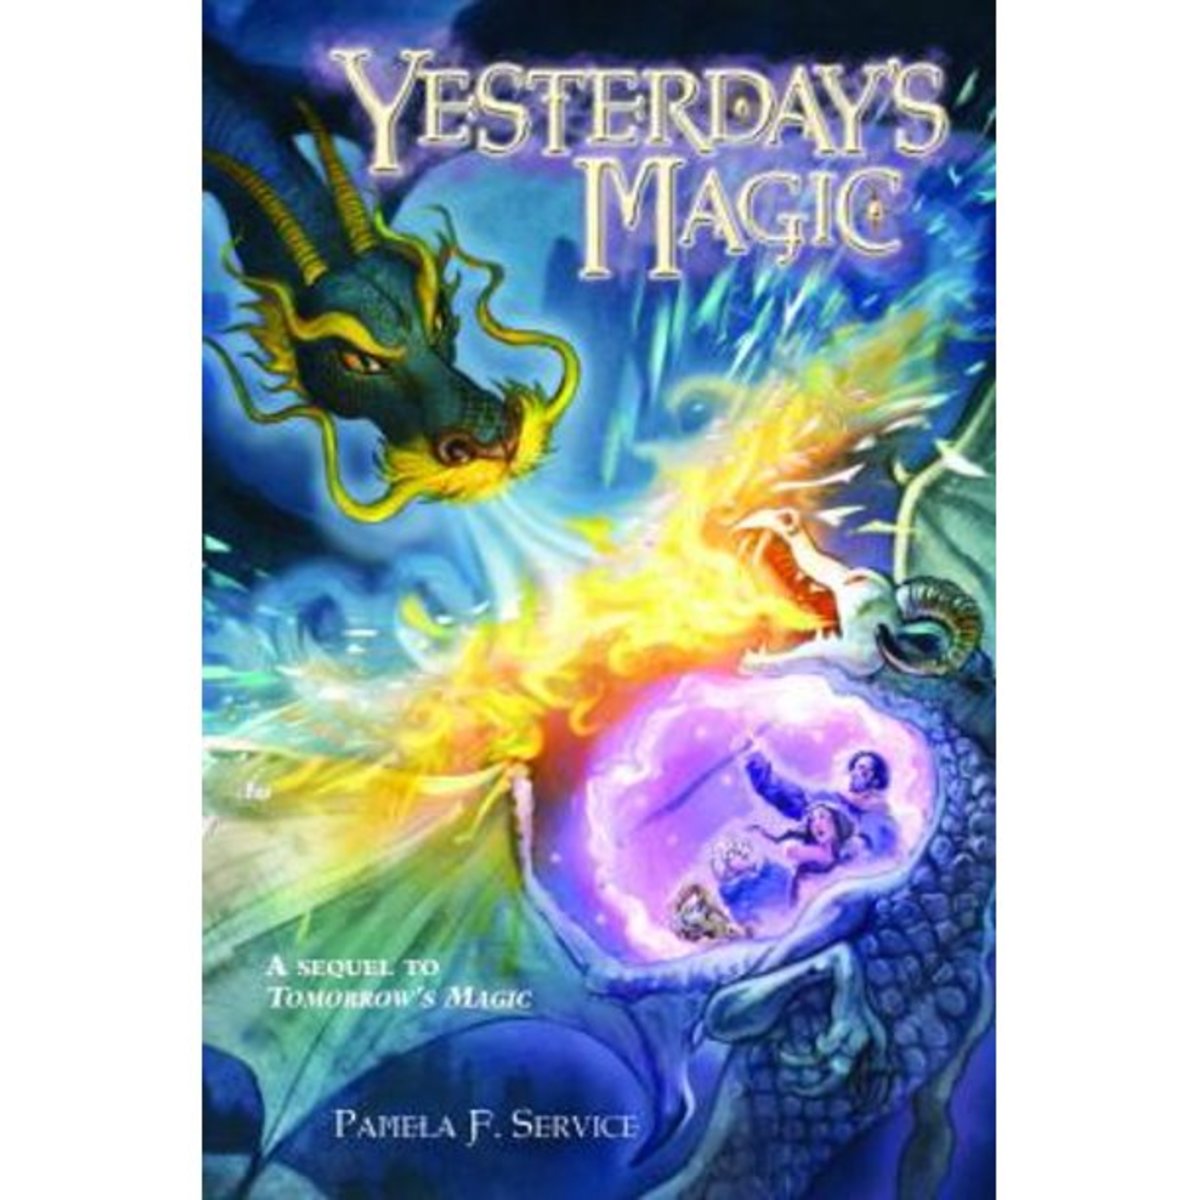 Yesterday's Magic Review